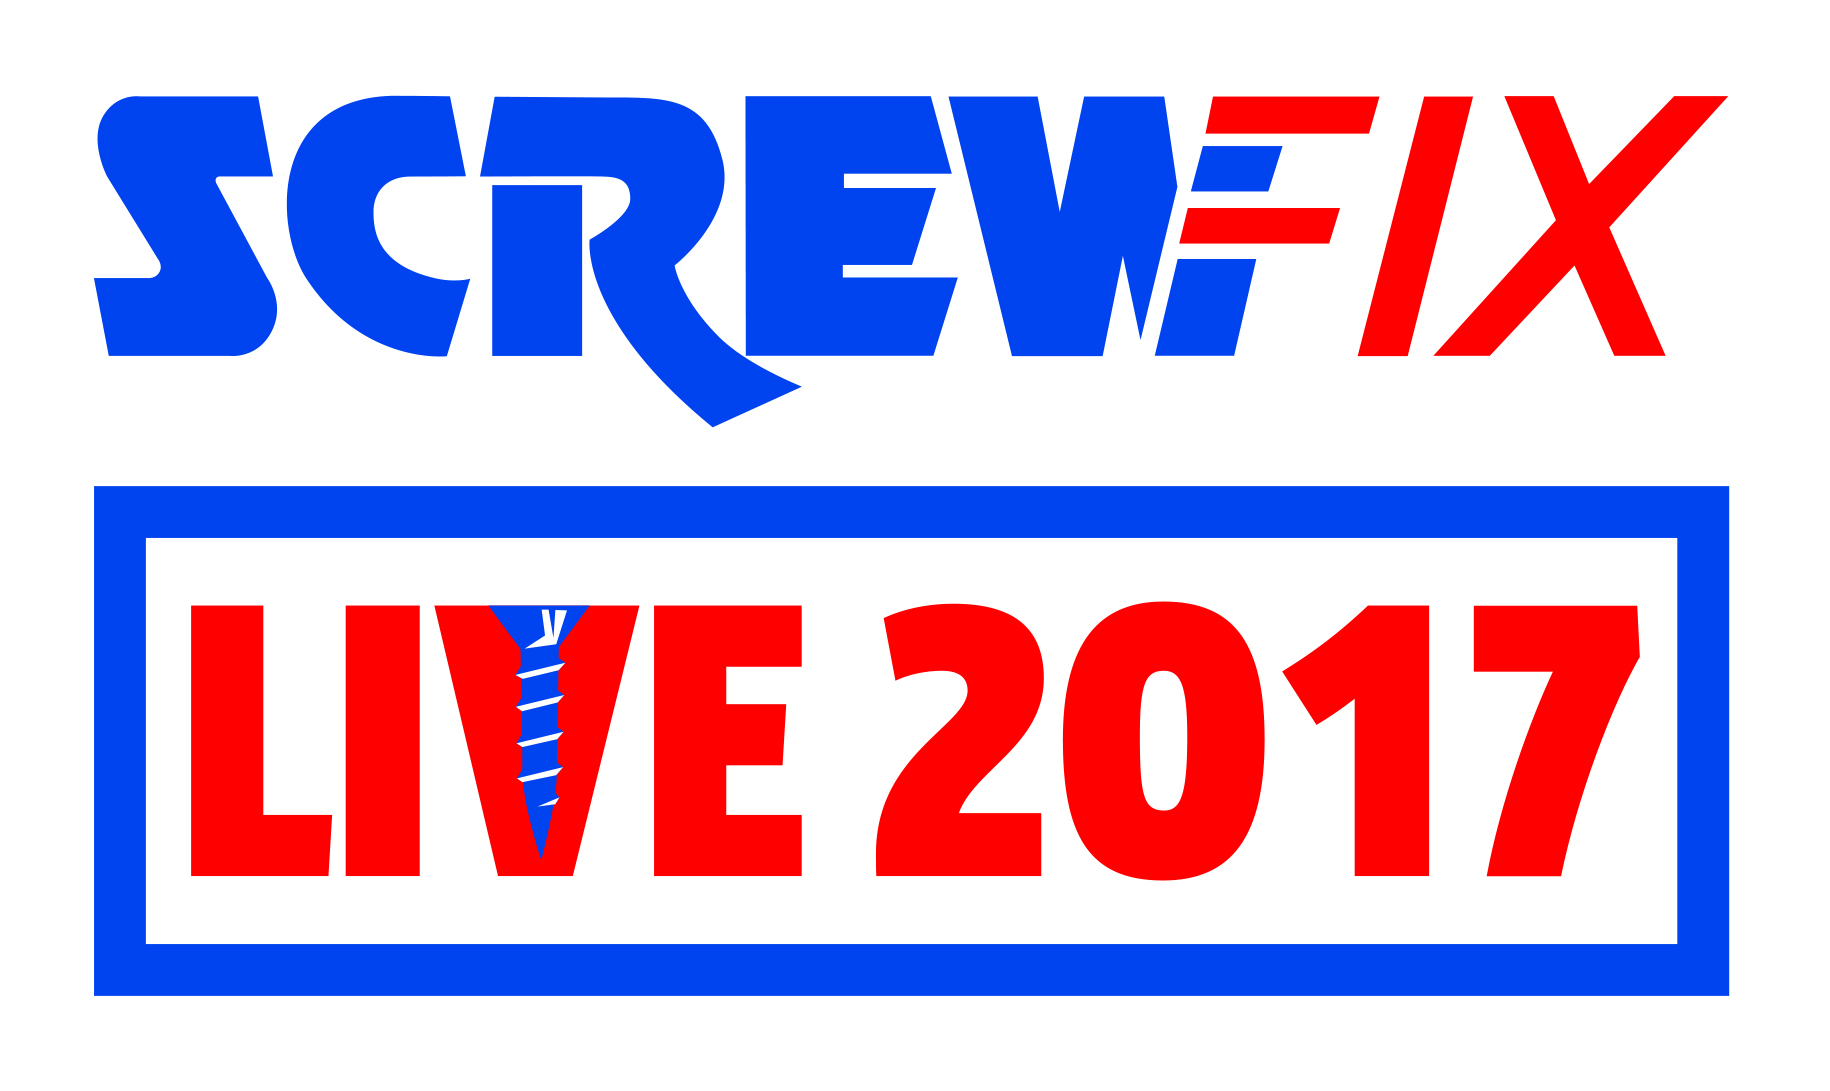 Register now for Screwfix LIVE 2017!